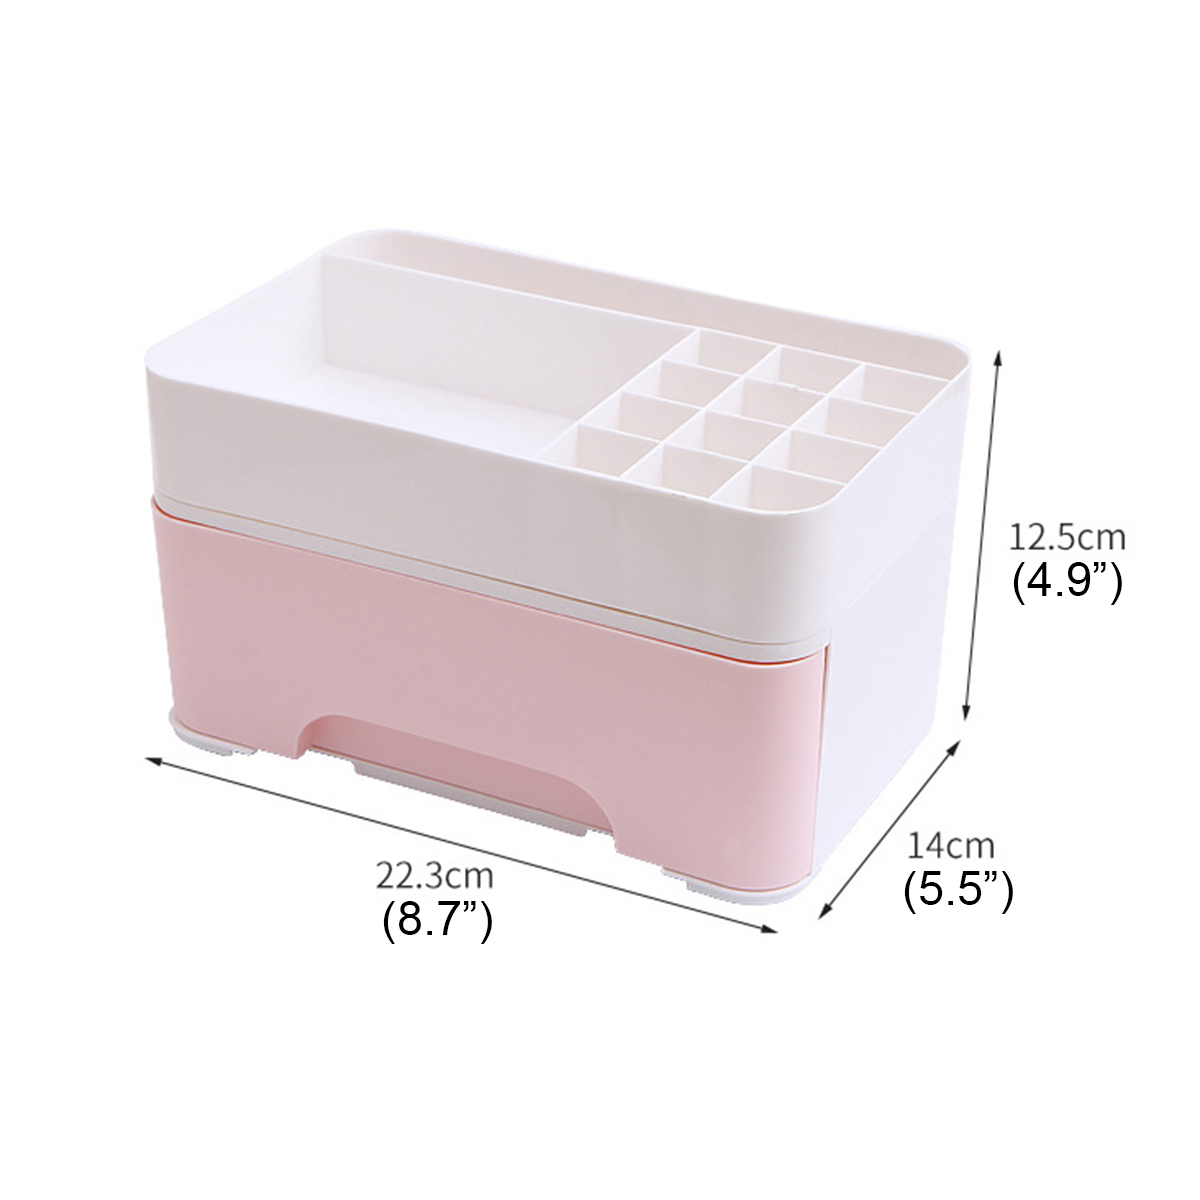 Desk-Skin-Care-Products-Storage-Box-Multi-functional-Lipstick-Cosmetic-Storage-Box-with-Drawer-Home--1763759-9